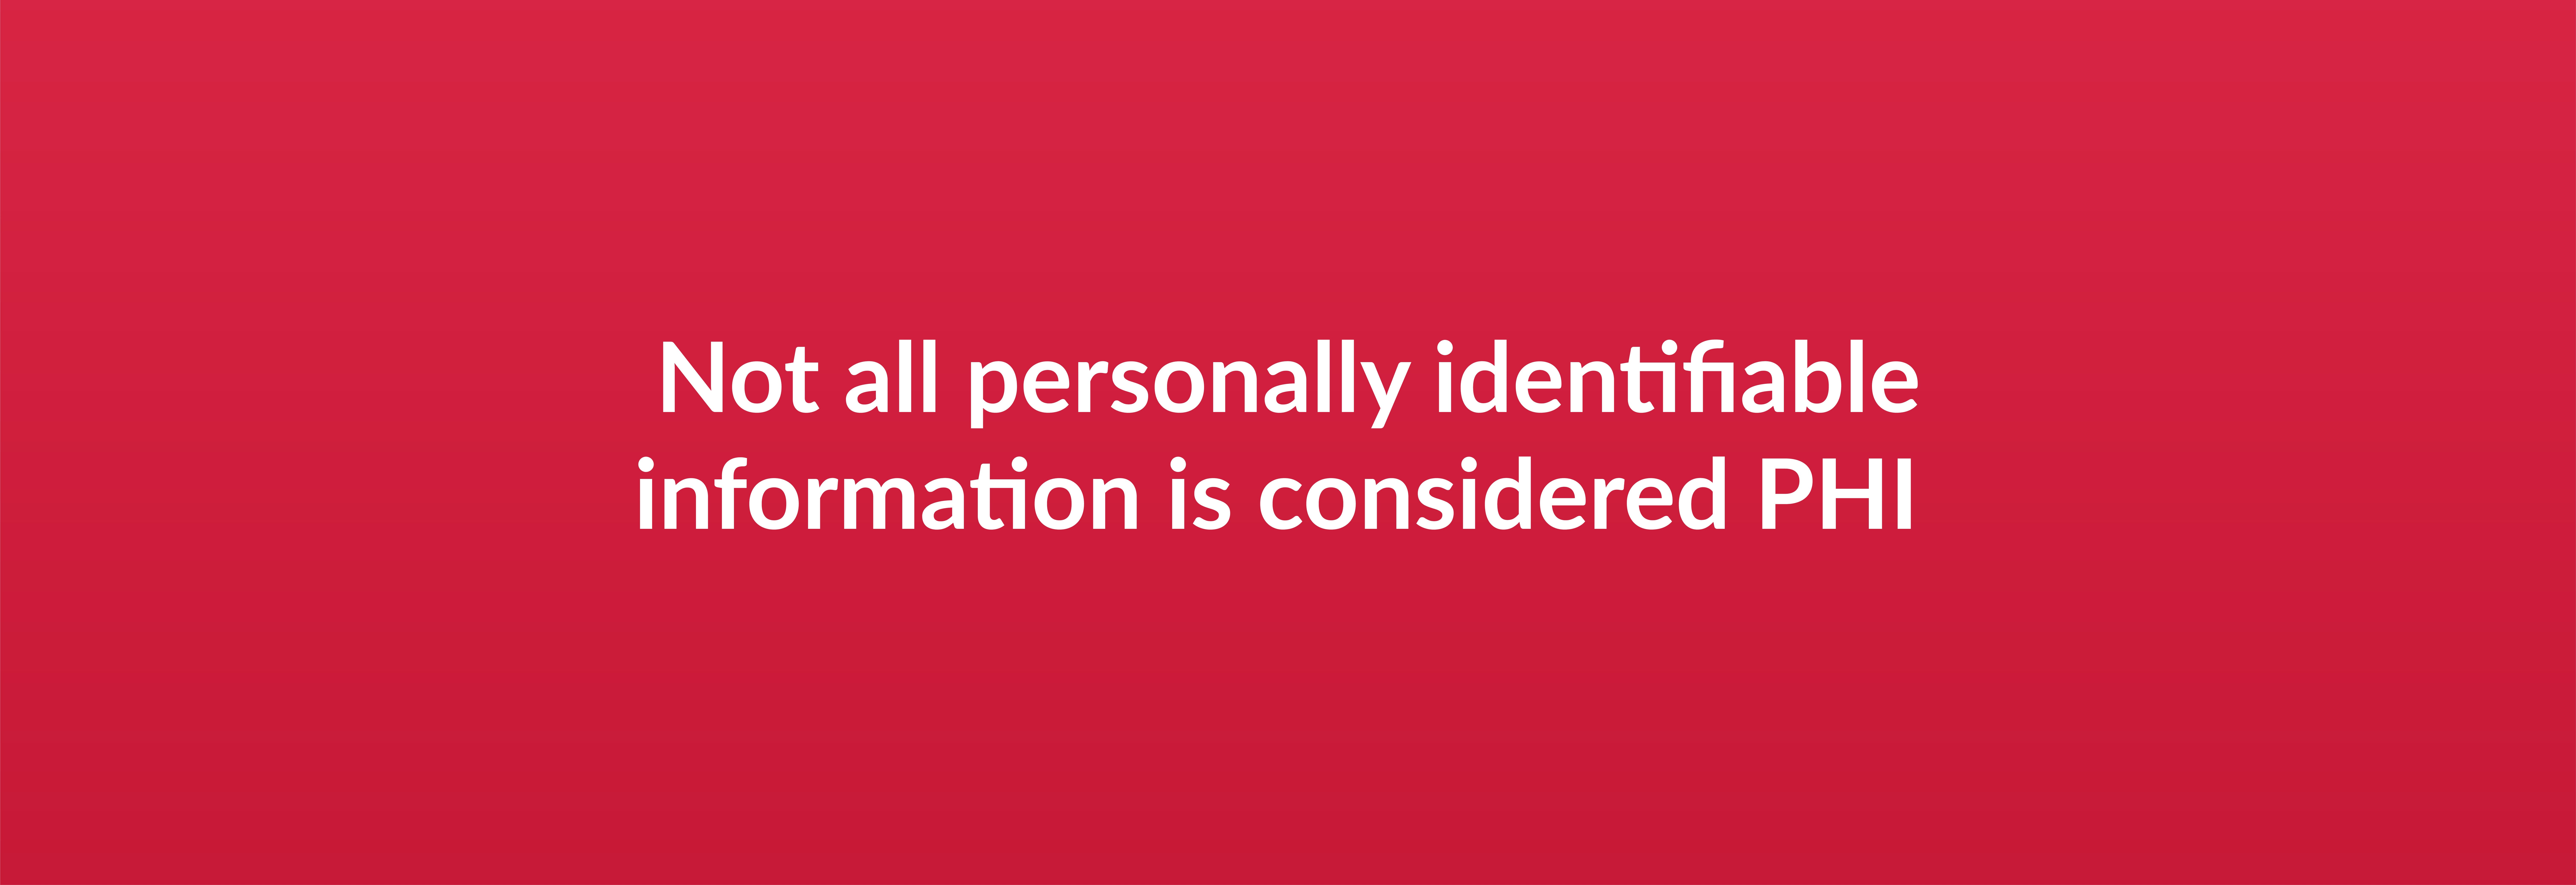 Not all personal identifiable information is considered PHI